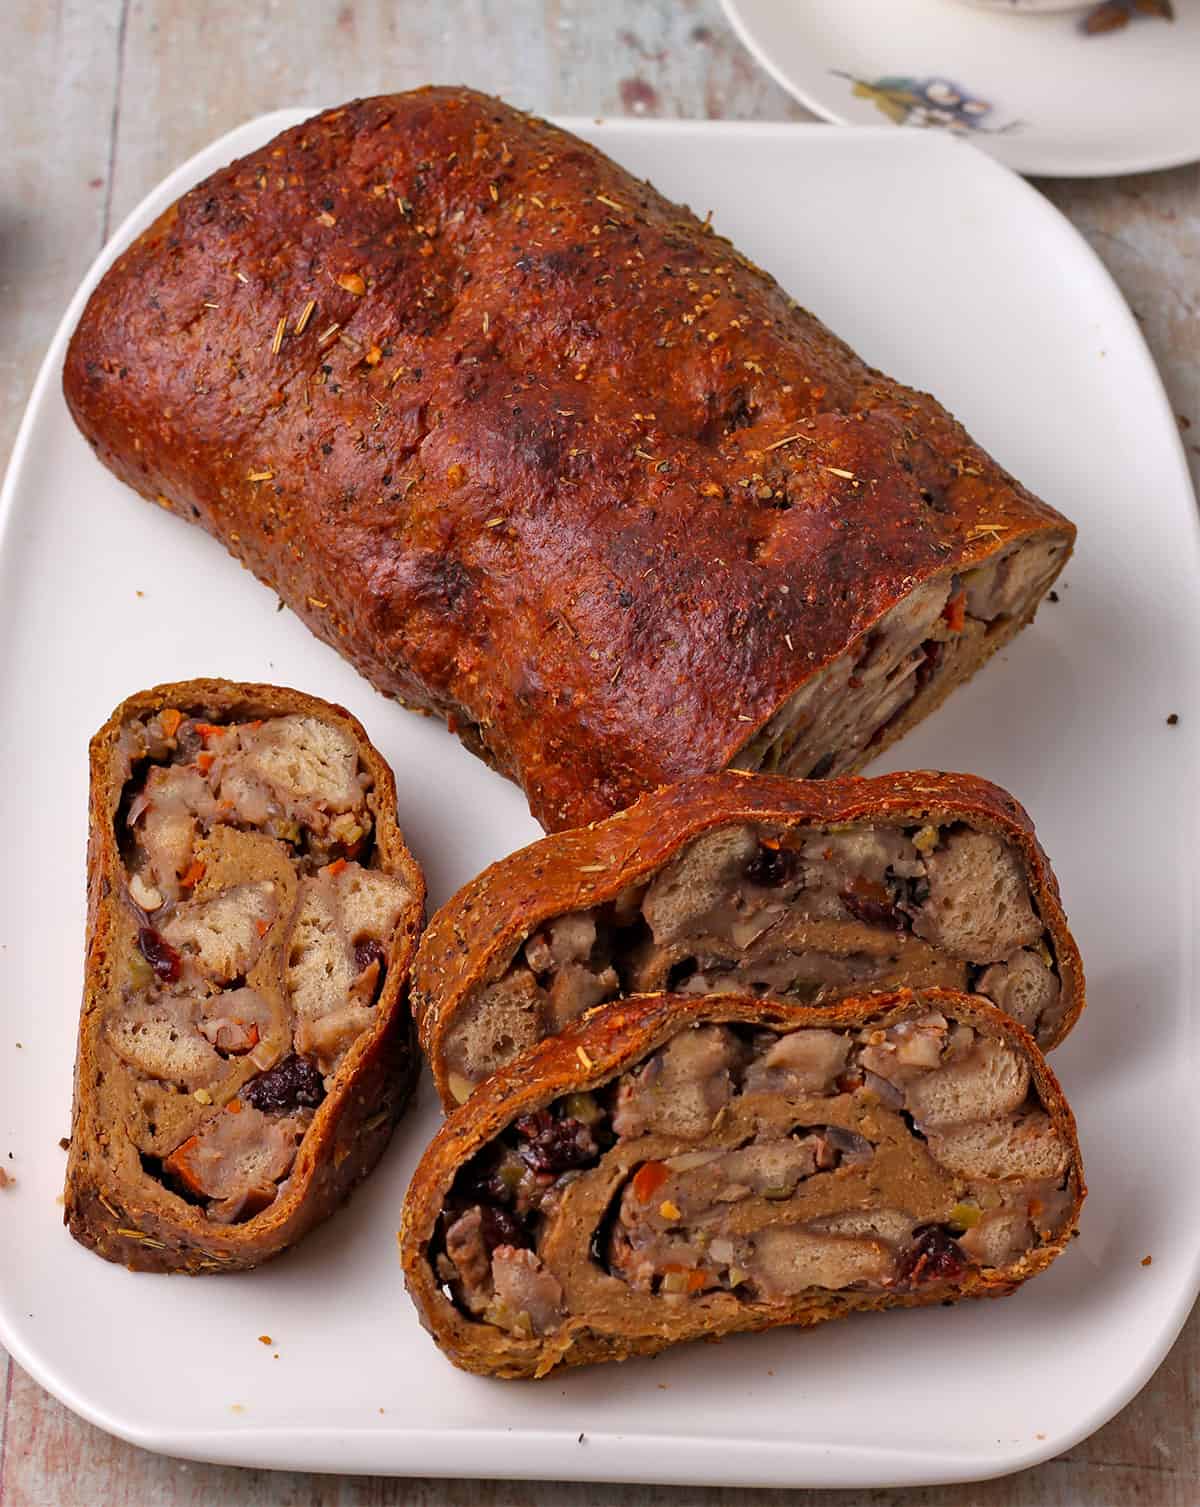 Sliced seitan roast with stuffing on a white plate.